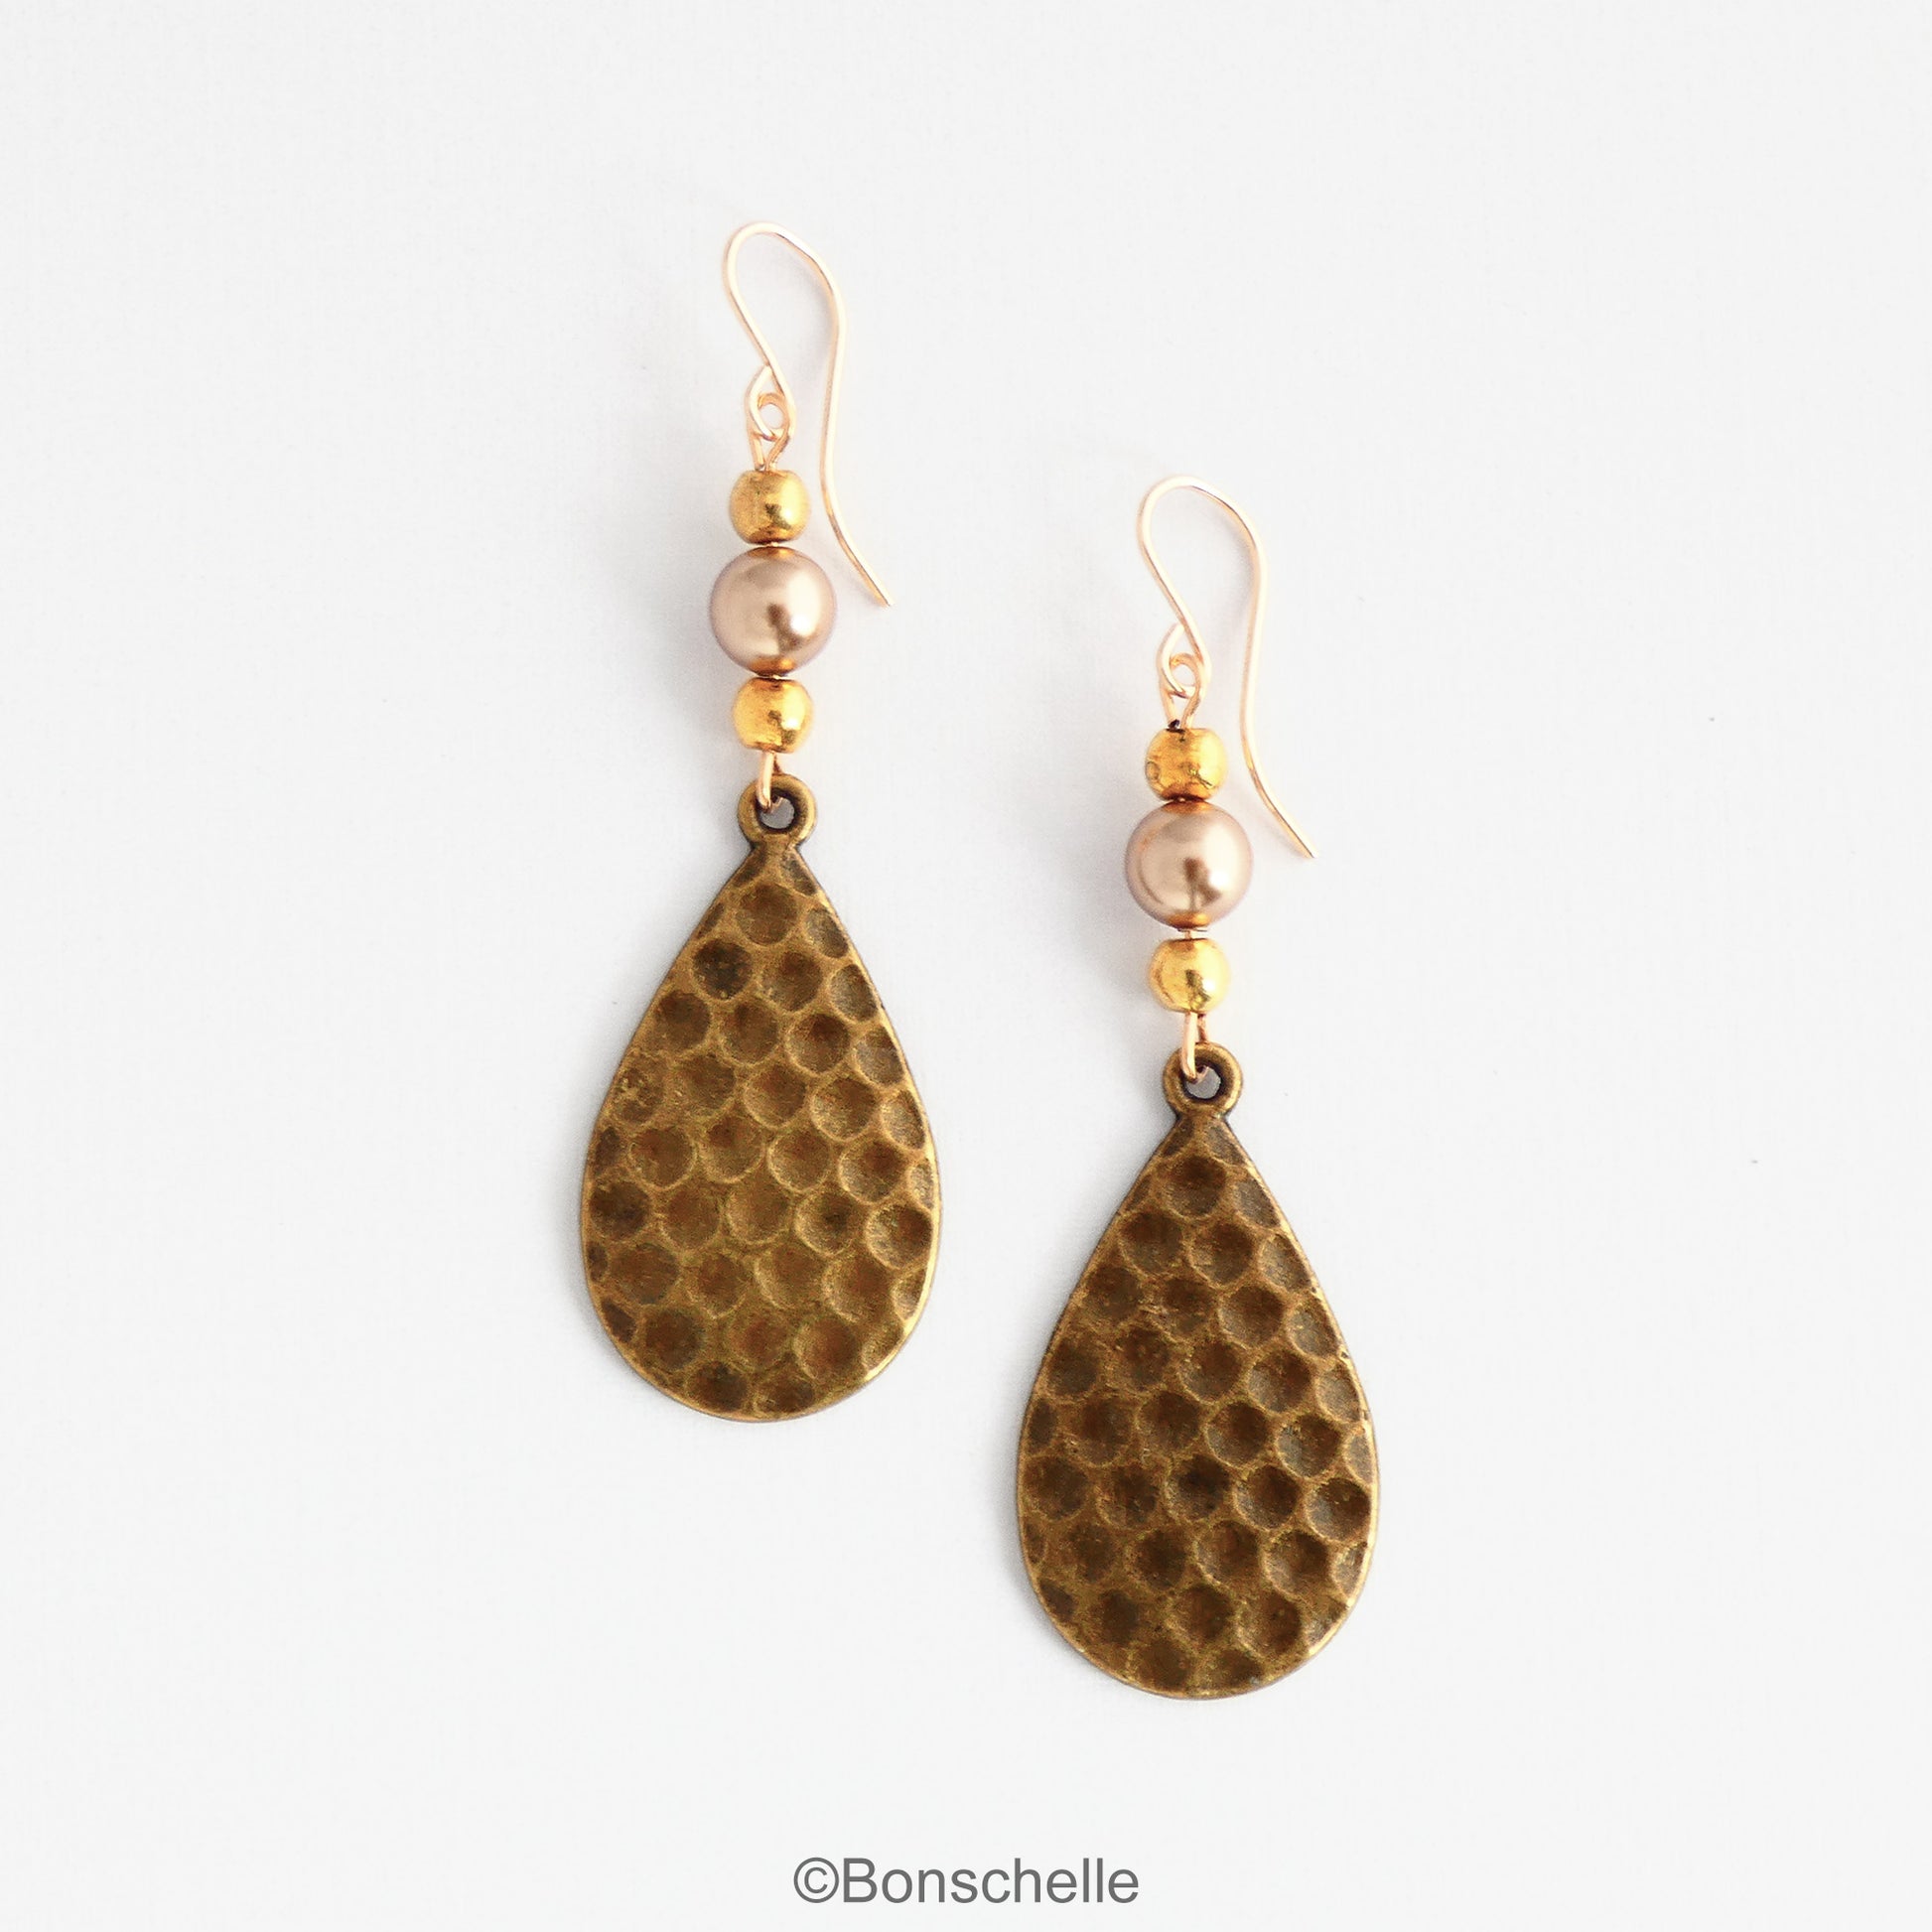 Antique bronze toned hammered metal teardrop earrings with bronze swarovski pearls, gold toned beads adn 14K gold filled earwires 